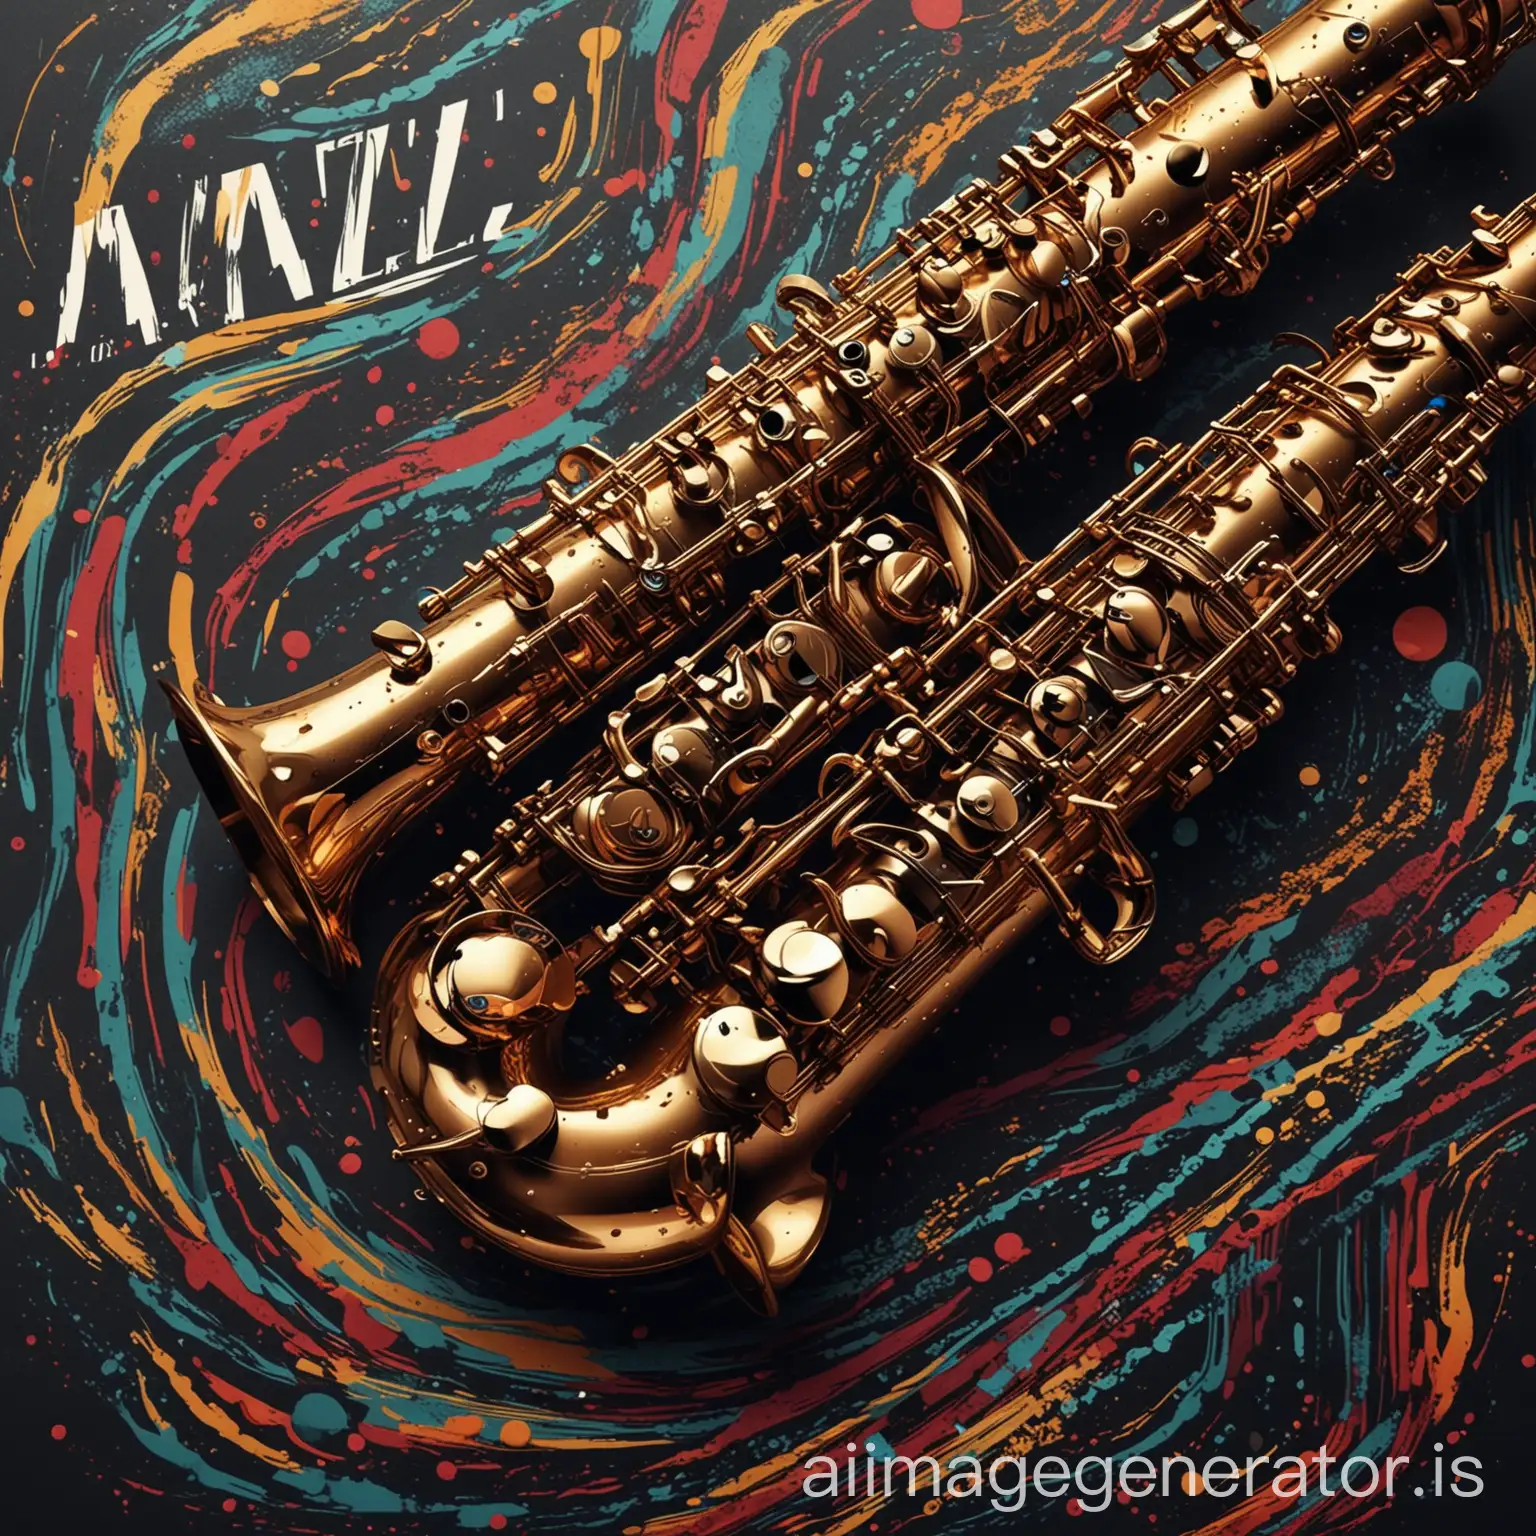 Vibrant-Jazz-Concert-Poster-with-Saxophone-and-Dynamic-Waves